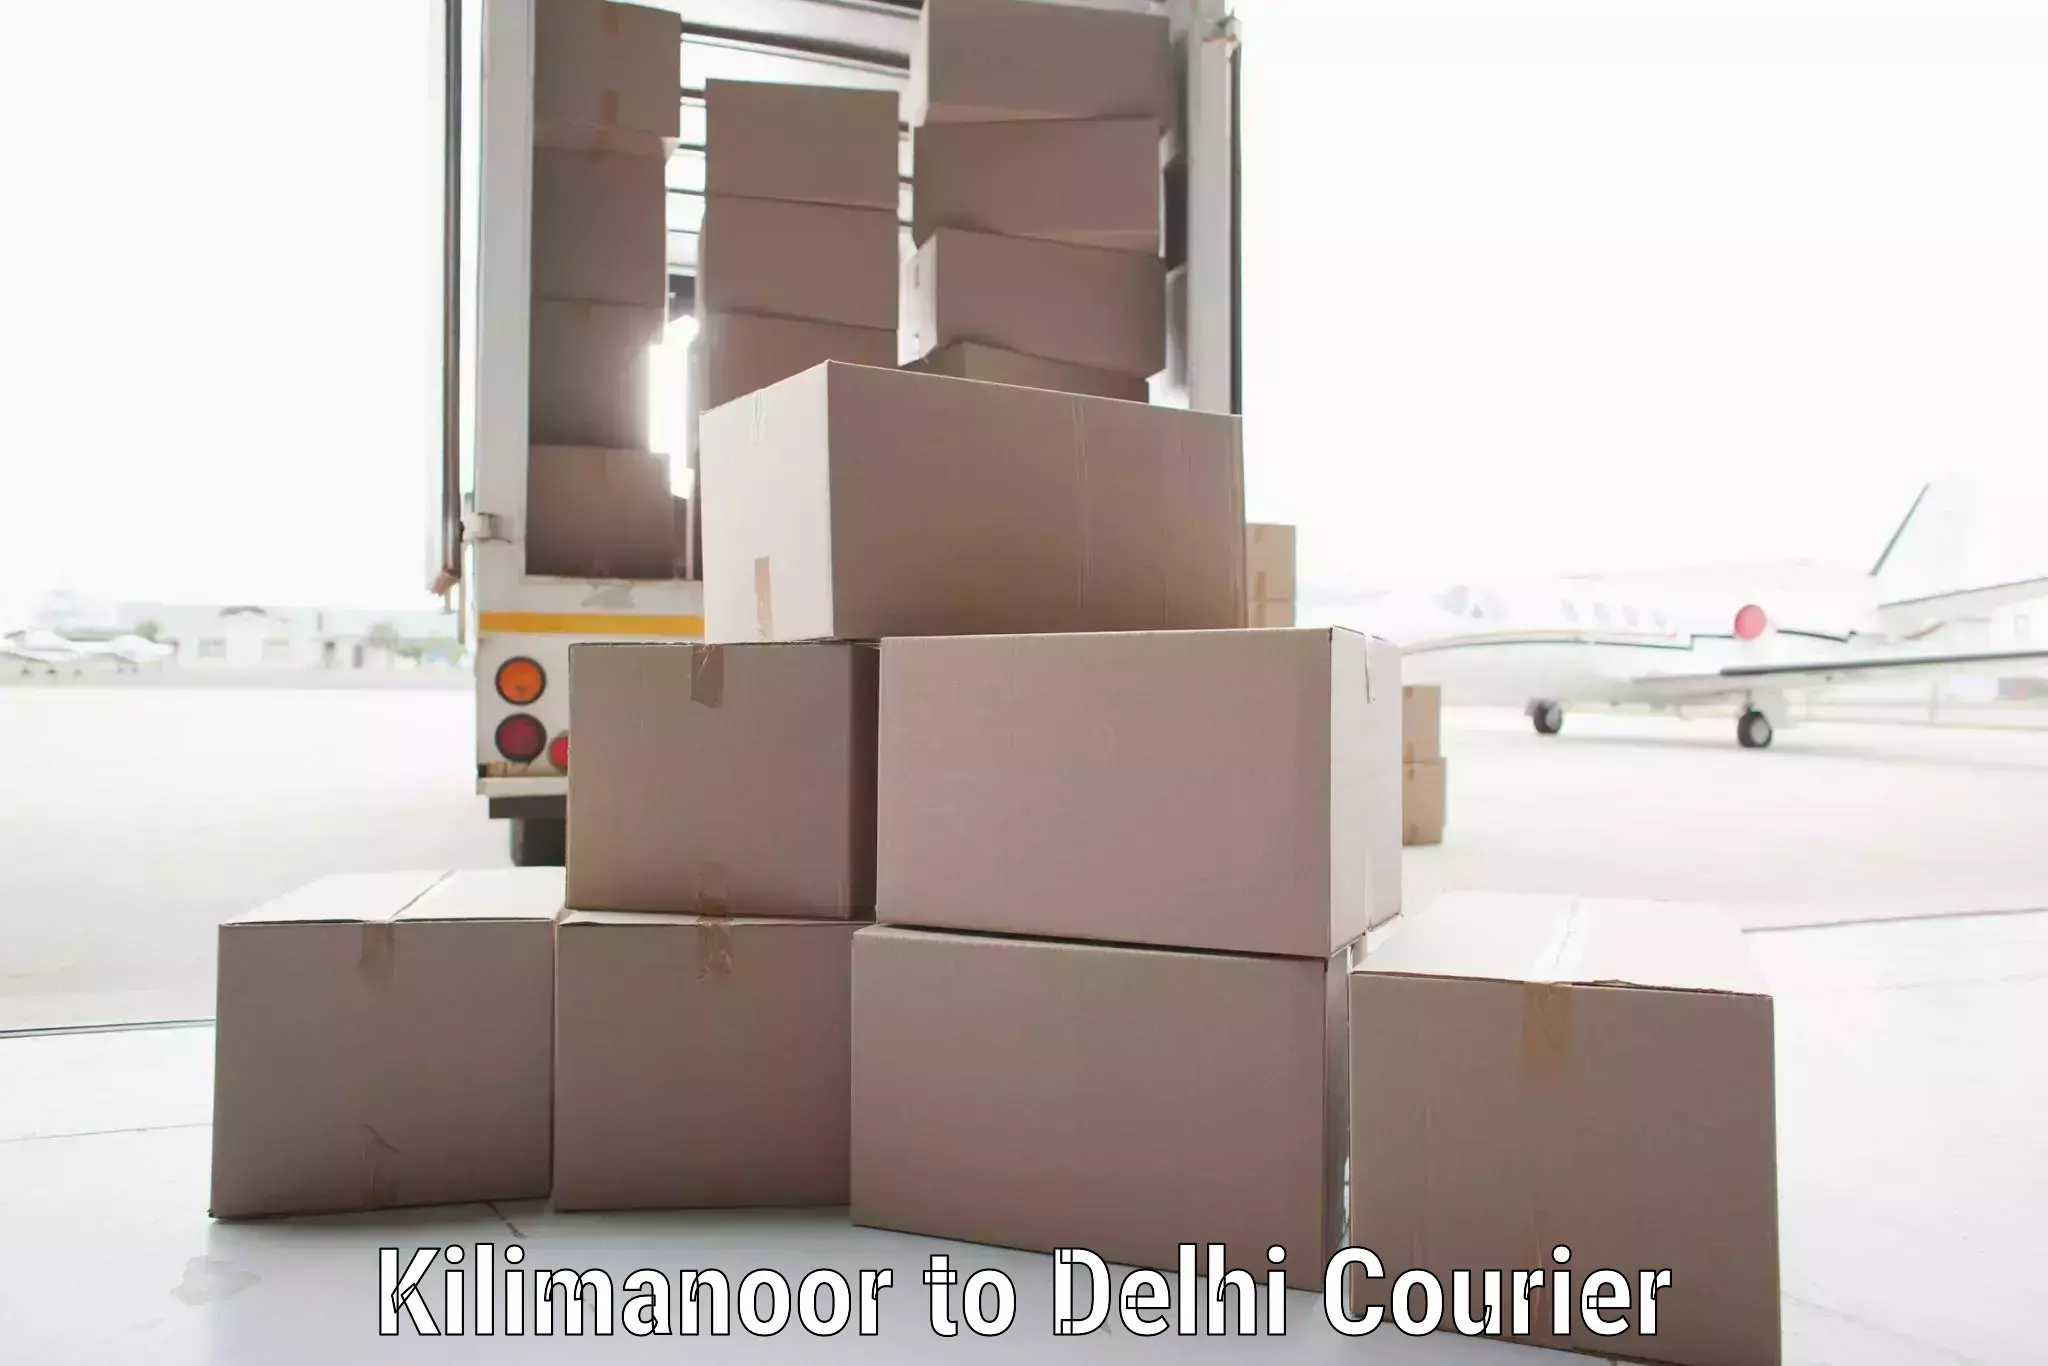 State-of-the-art courier technology Kilimanoor to Sarojini Nagar